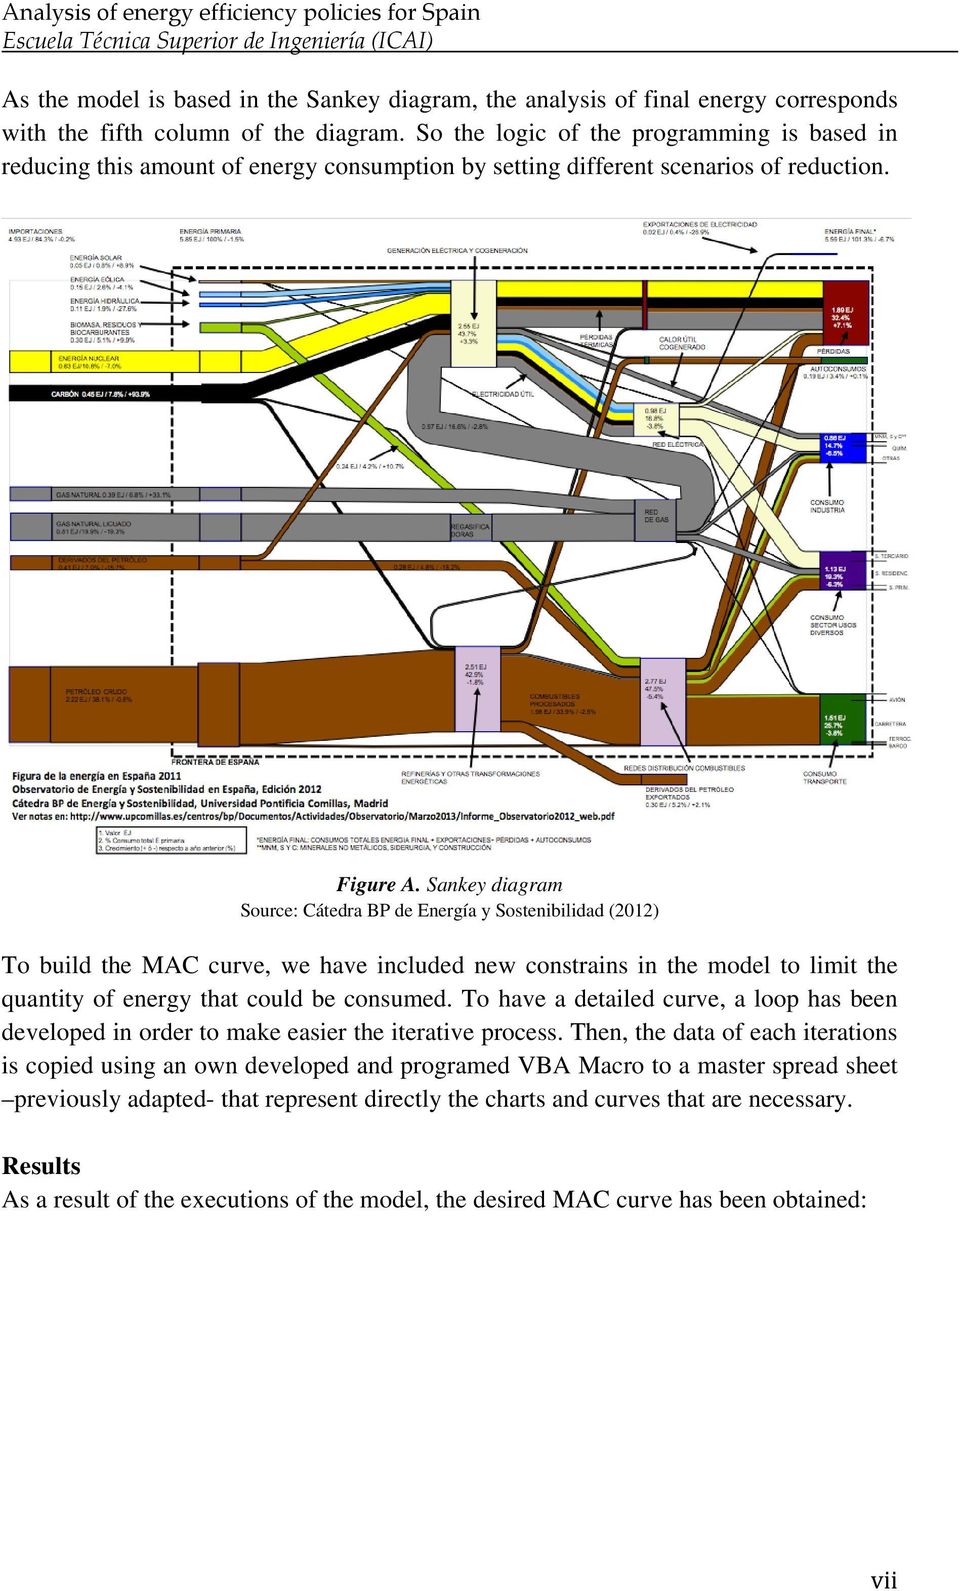 Sankey diagram Source: Cátedra BP de Energía y Sostenibilidad (2012) To build the MAC curve, we have included new constrains in the model to limit the quantity of energy that could be consumed.